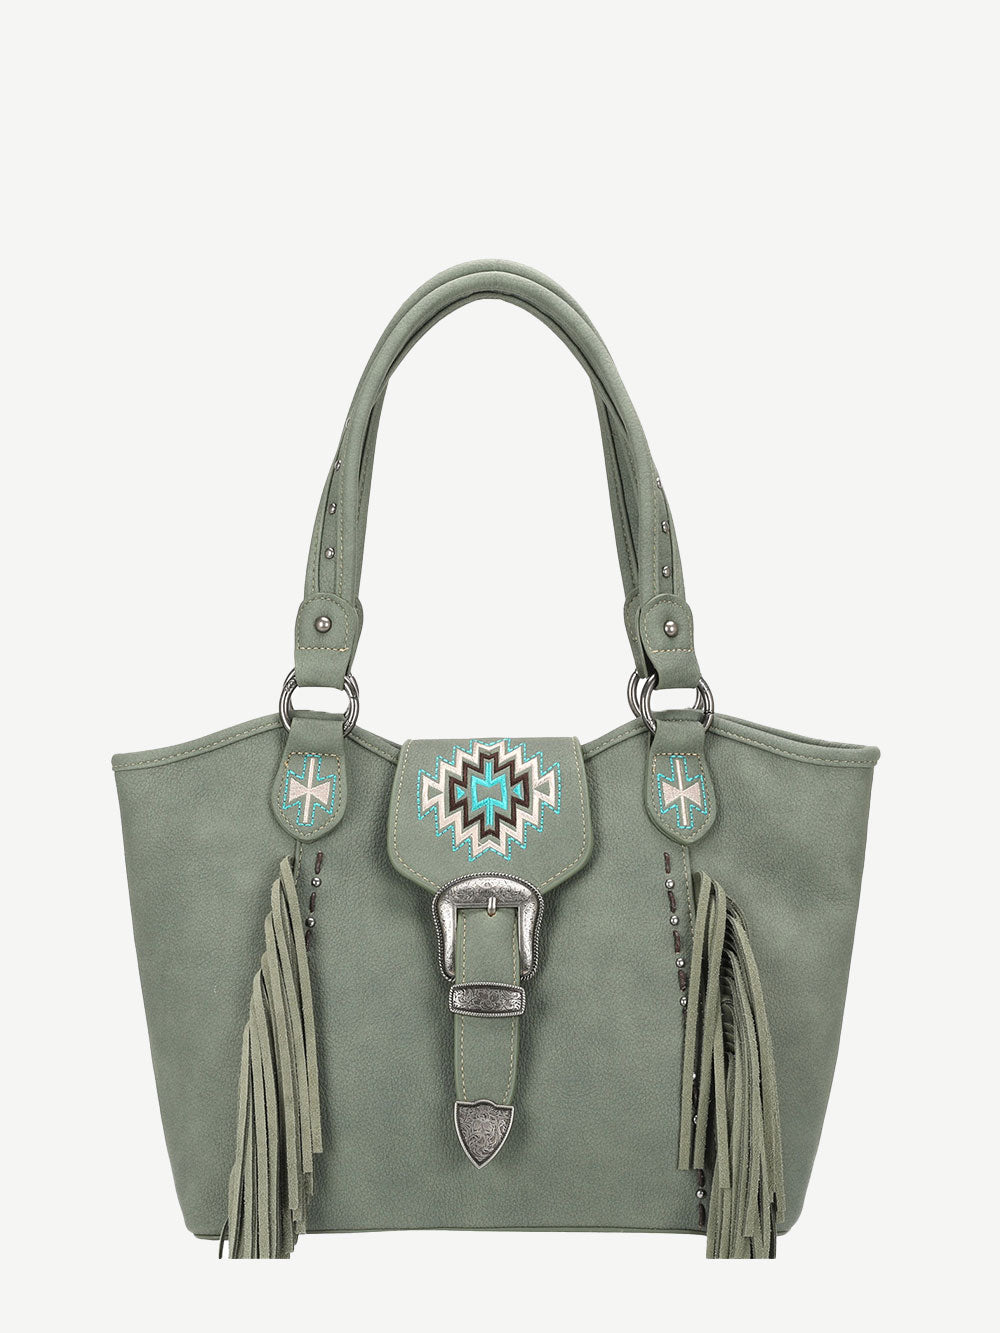 Montana West Embroidered Aztec Leather Fringe Buckle Tote - Montana West World